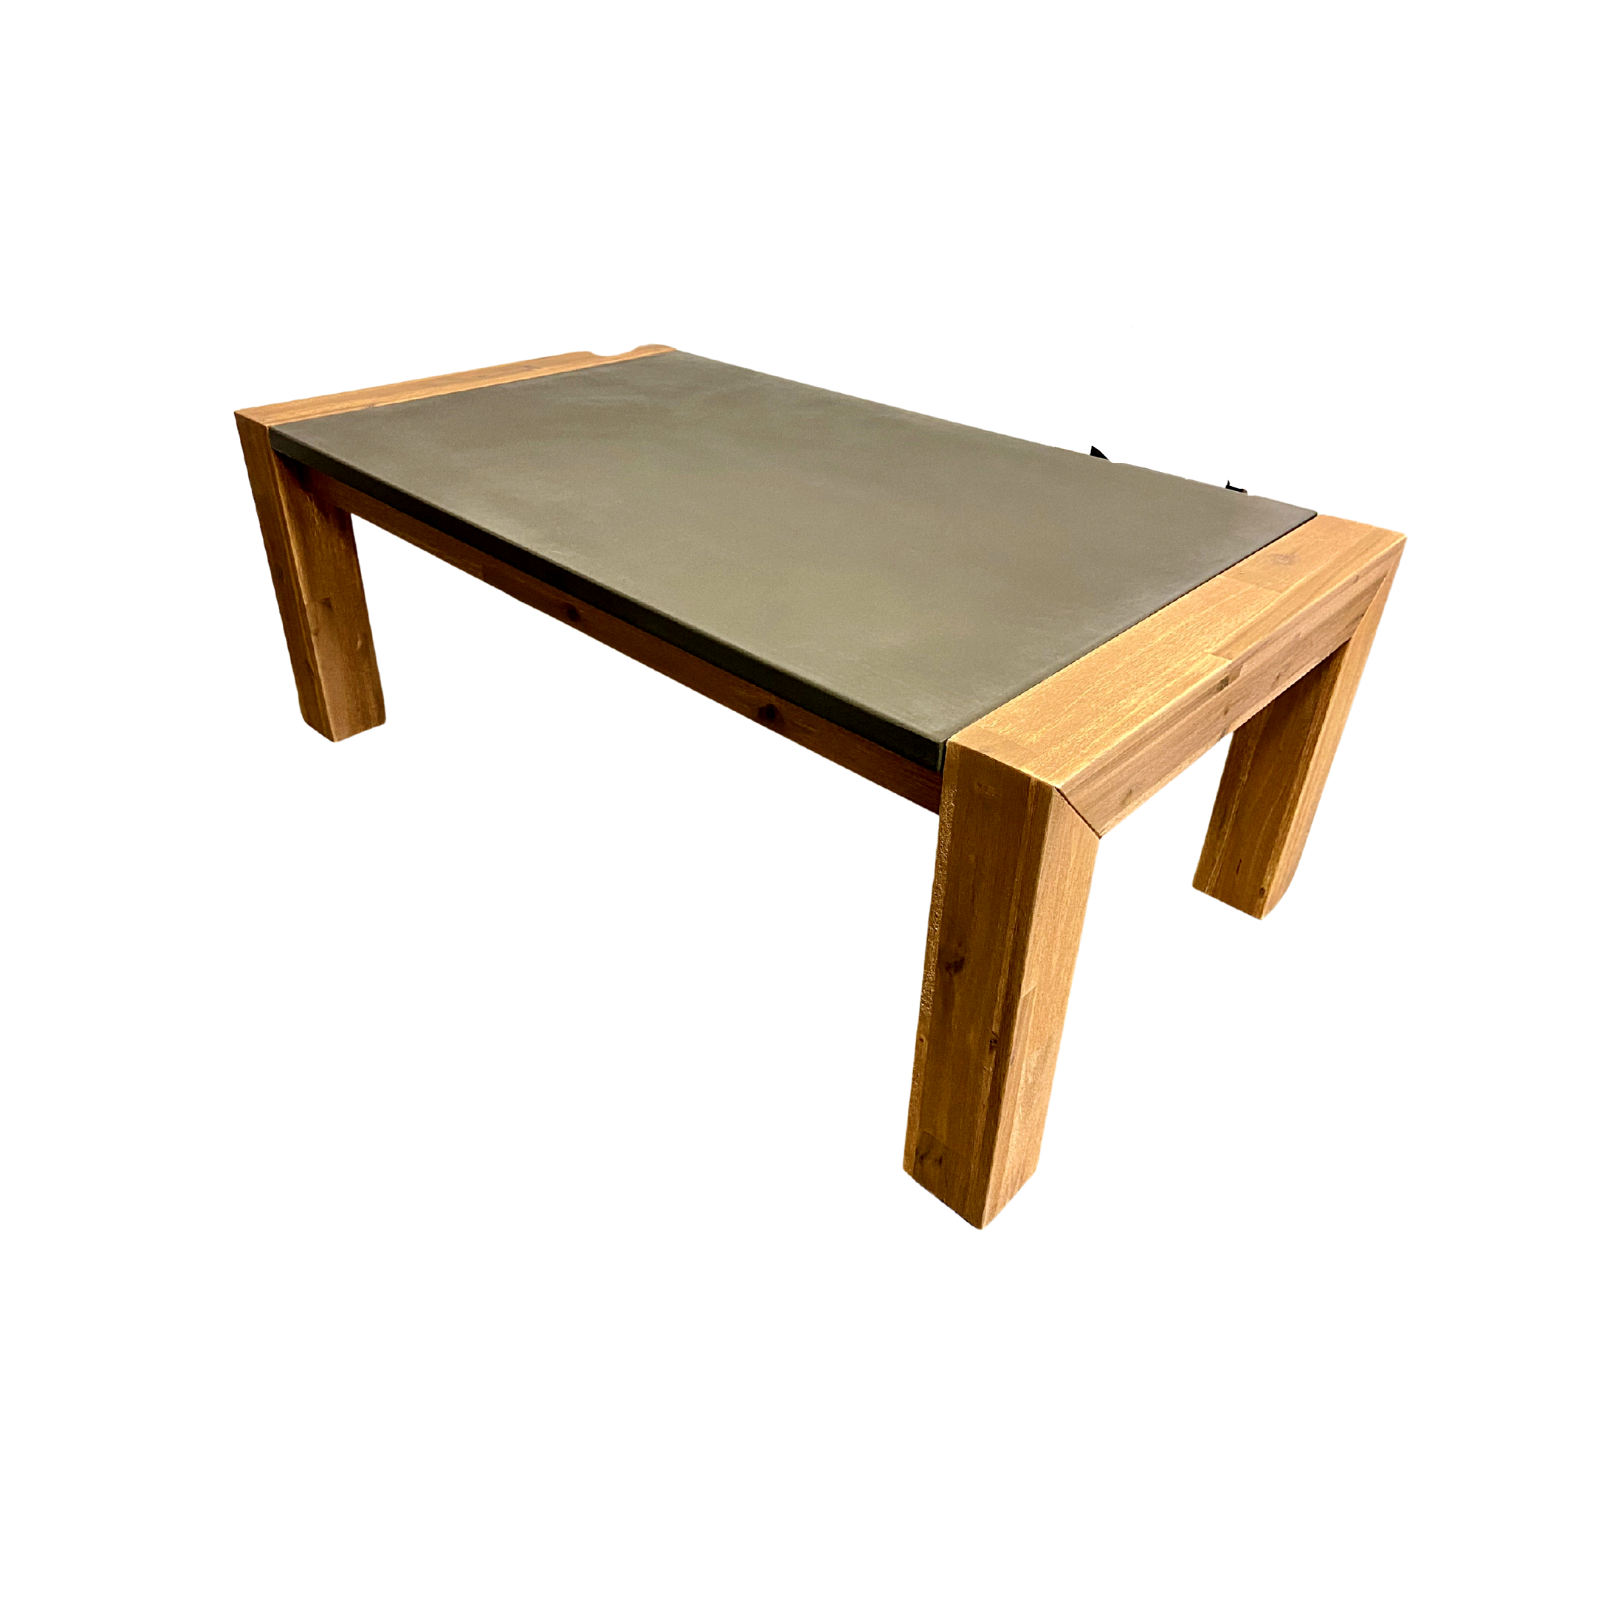 Acacia Solid Wood And Concrete Wooden Coffee Table